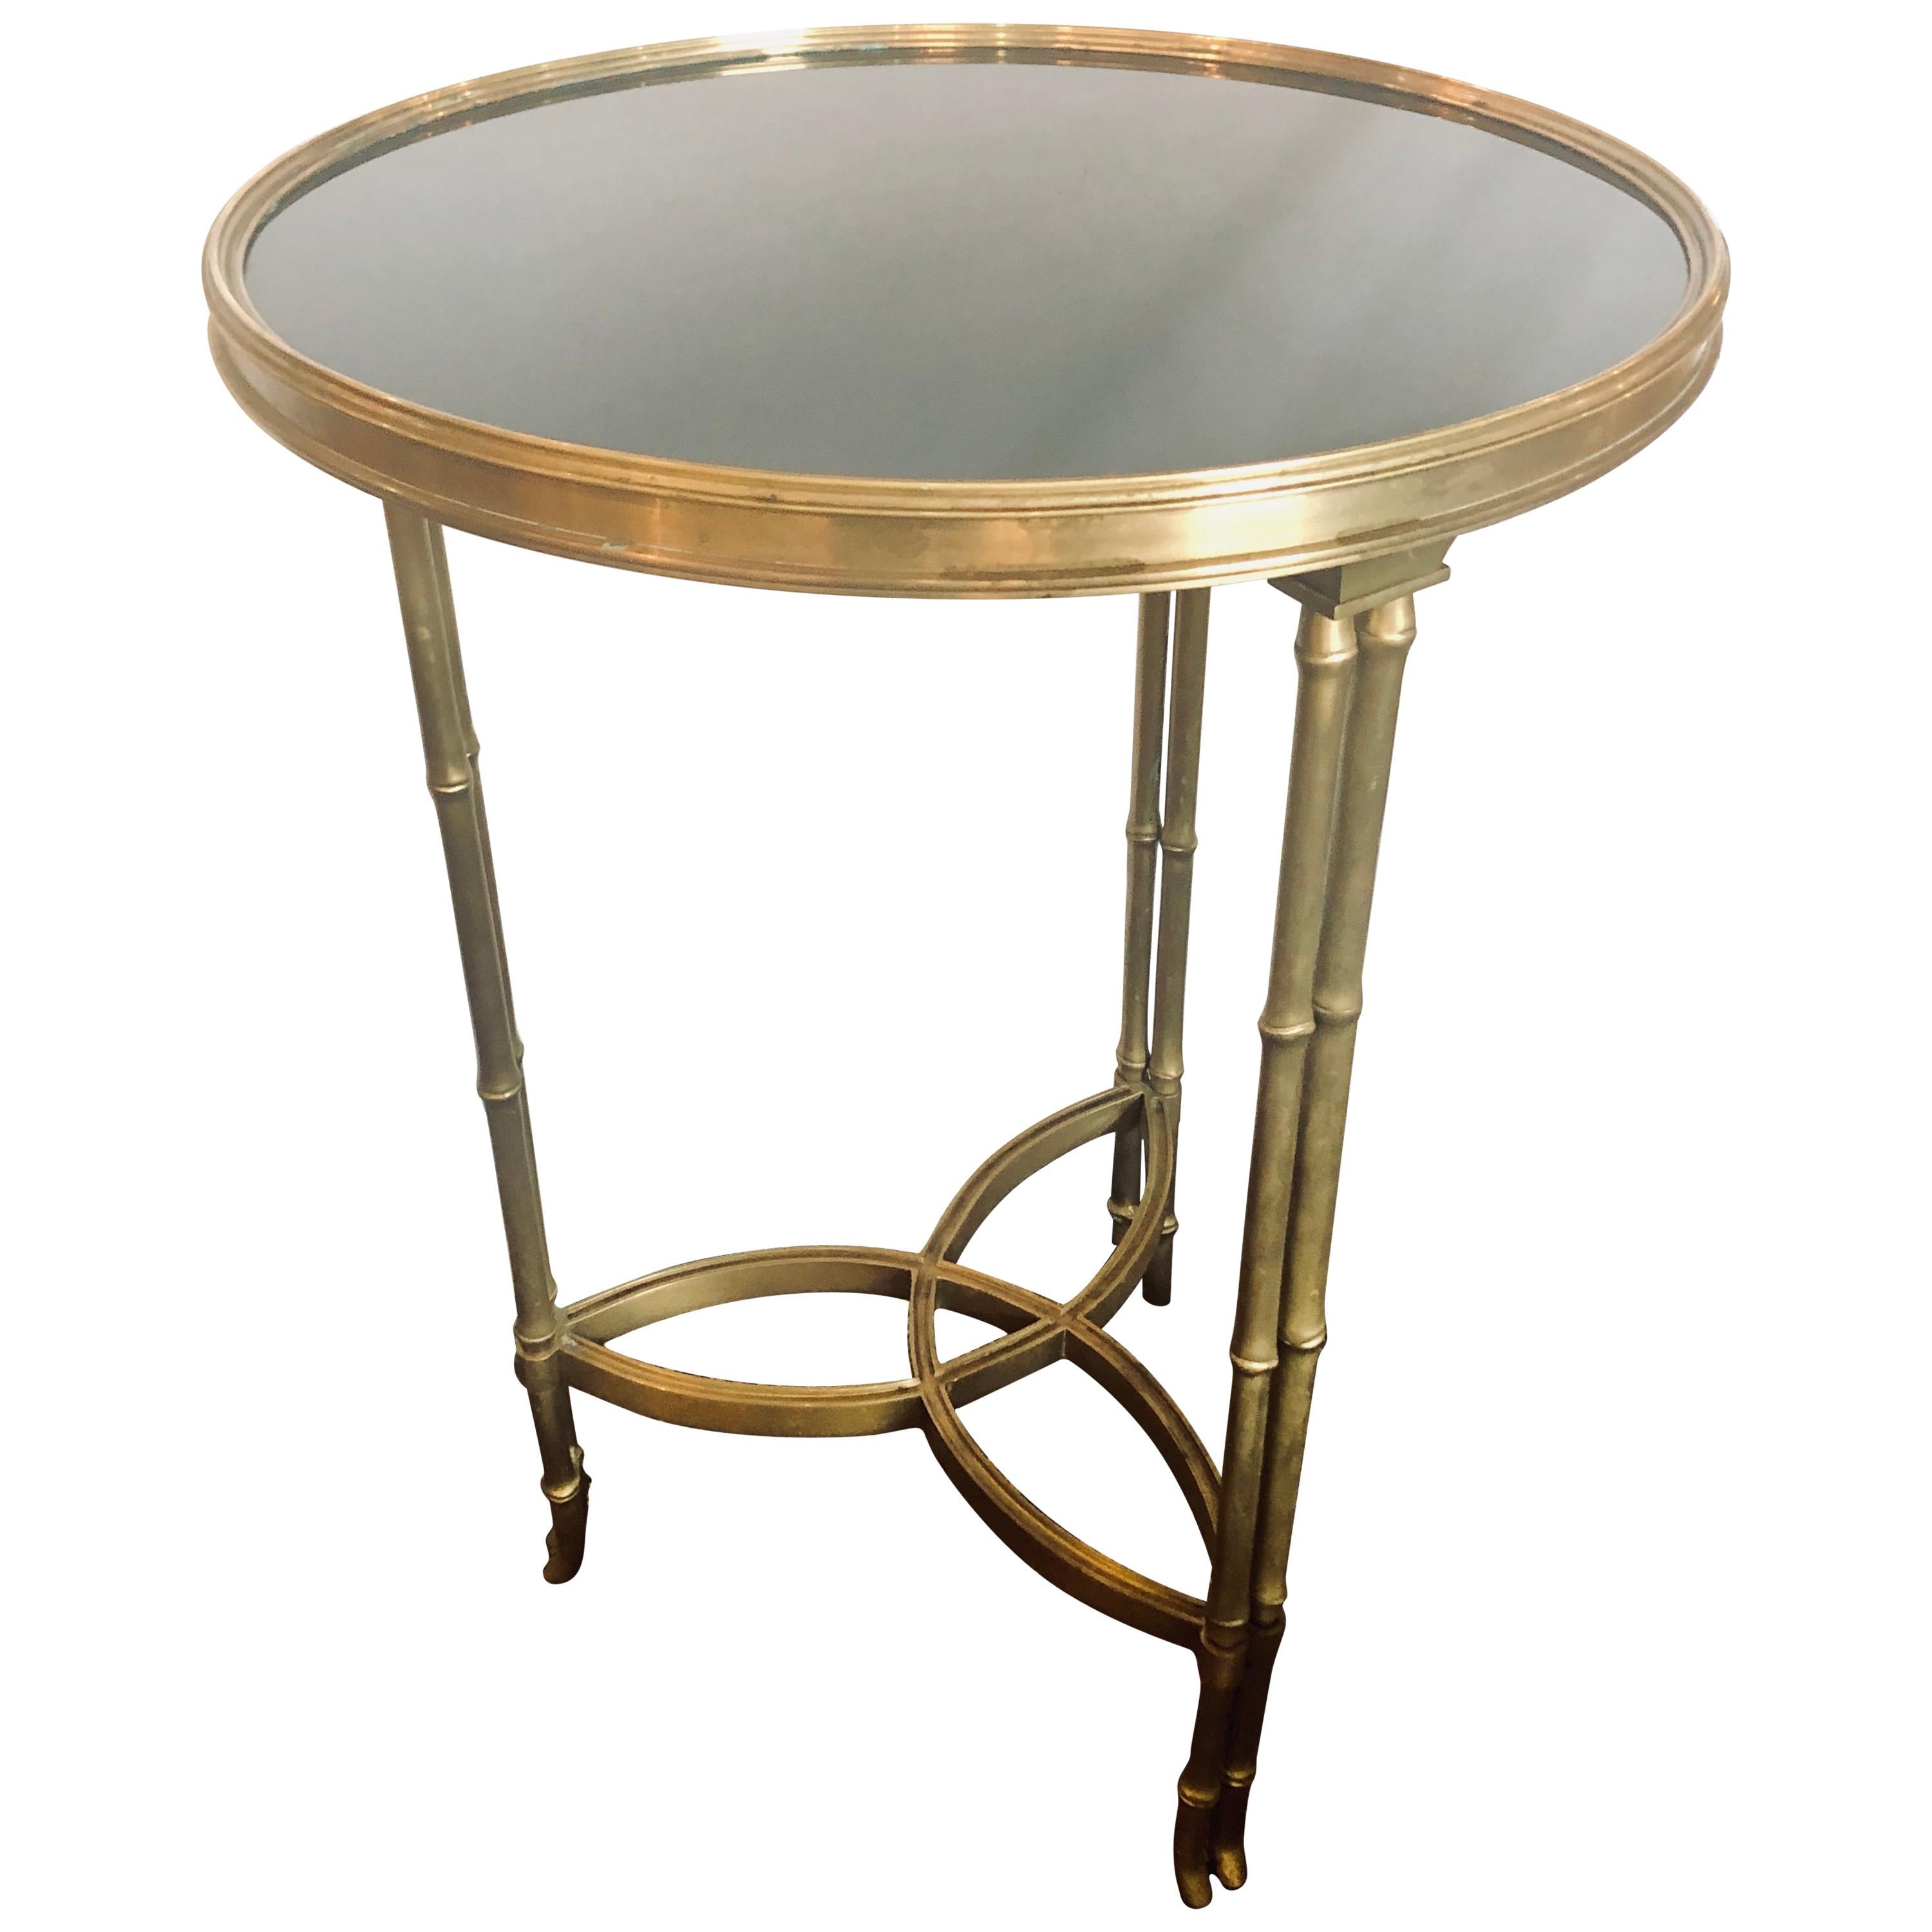 Art Deco Bamboo Form Marble-Top Side or Lamp Table Pedestal